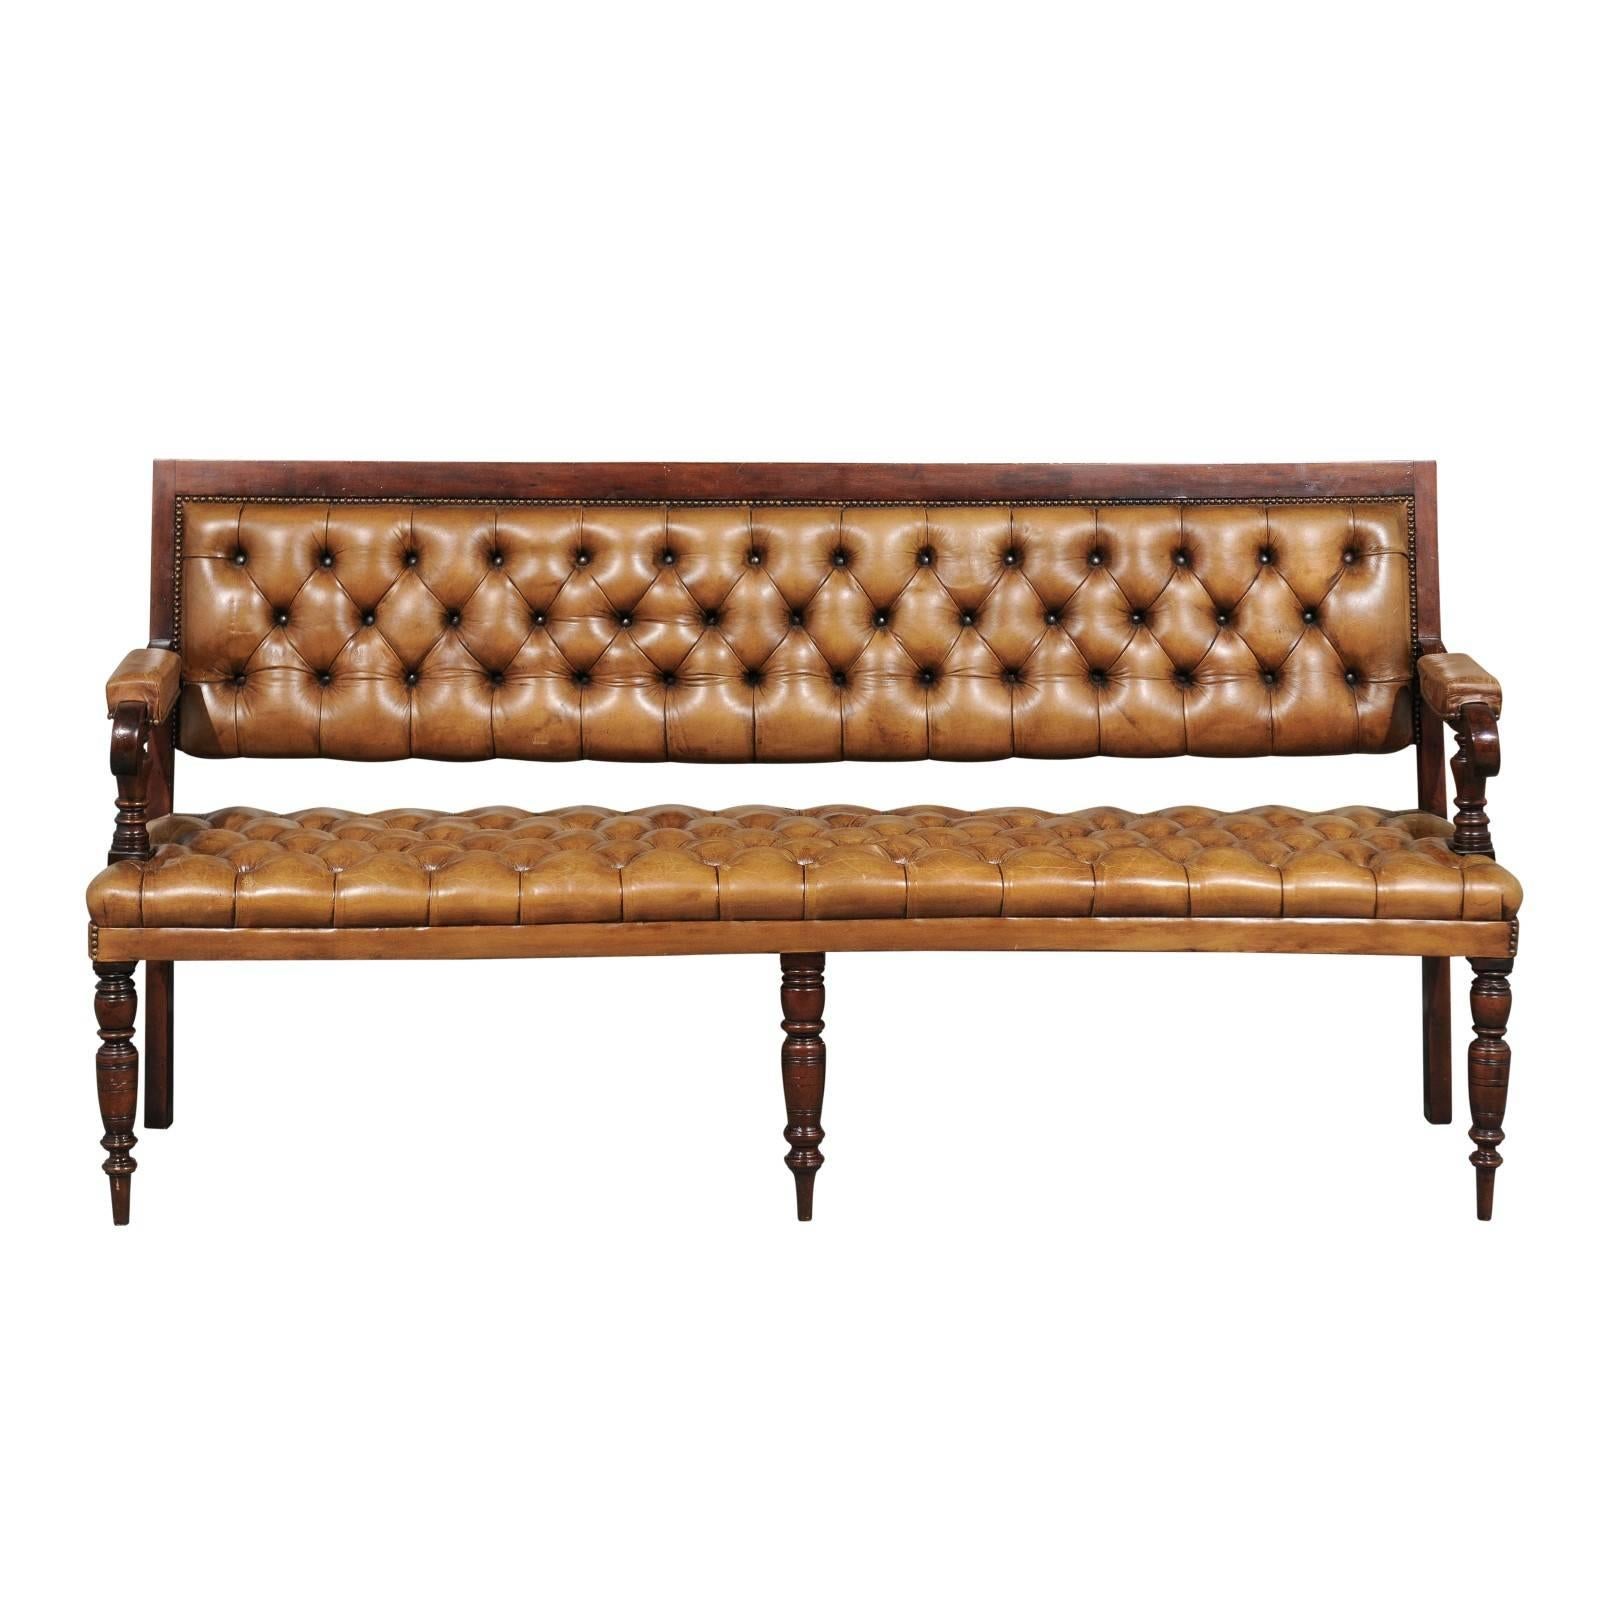 English Tufted Leather Upholstered Wooden Bench from the Late 19th Century